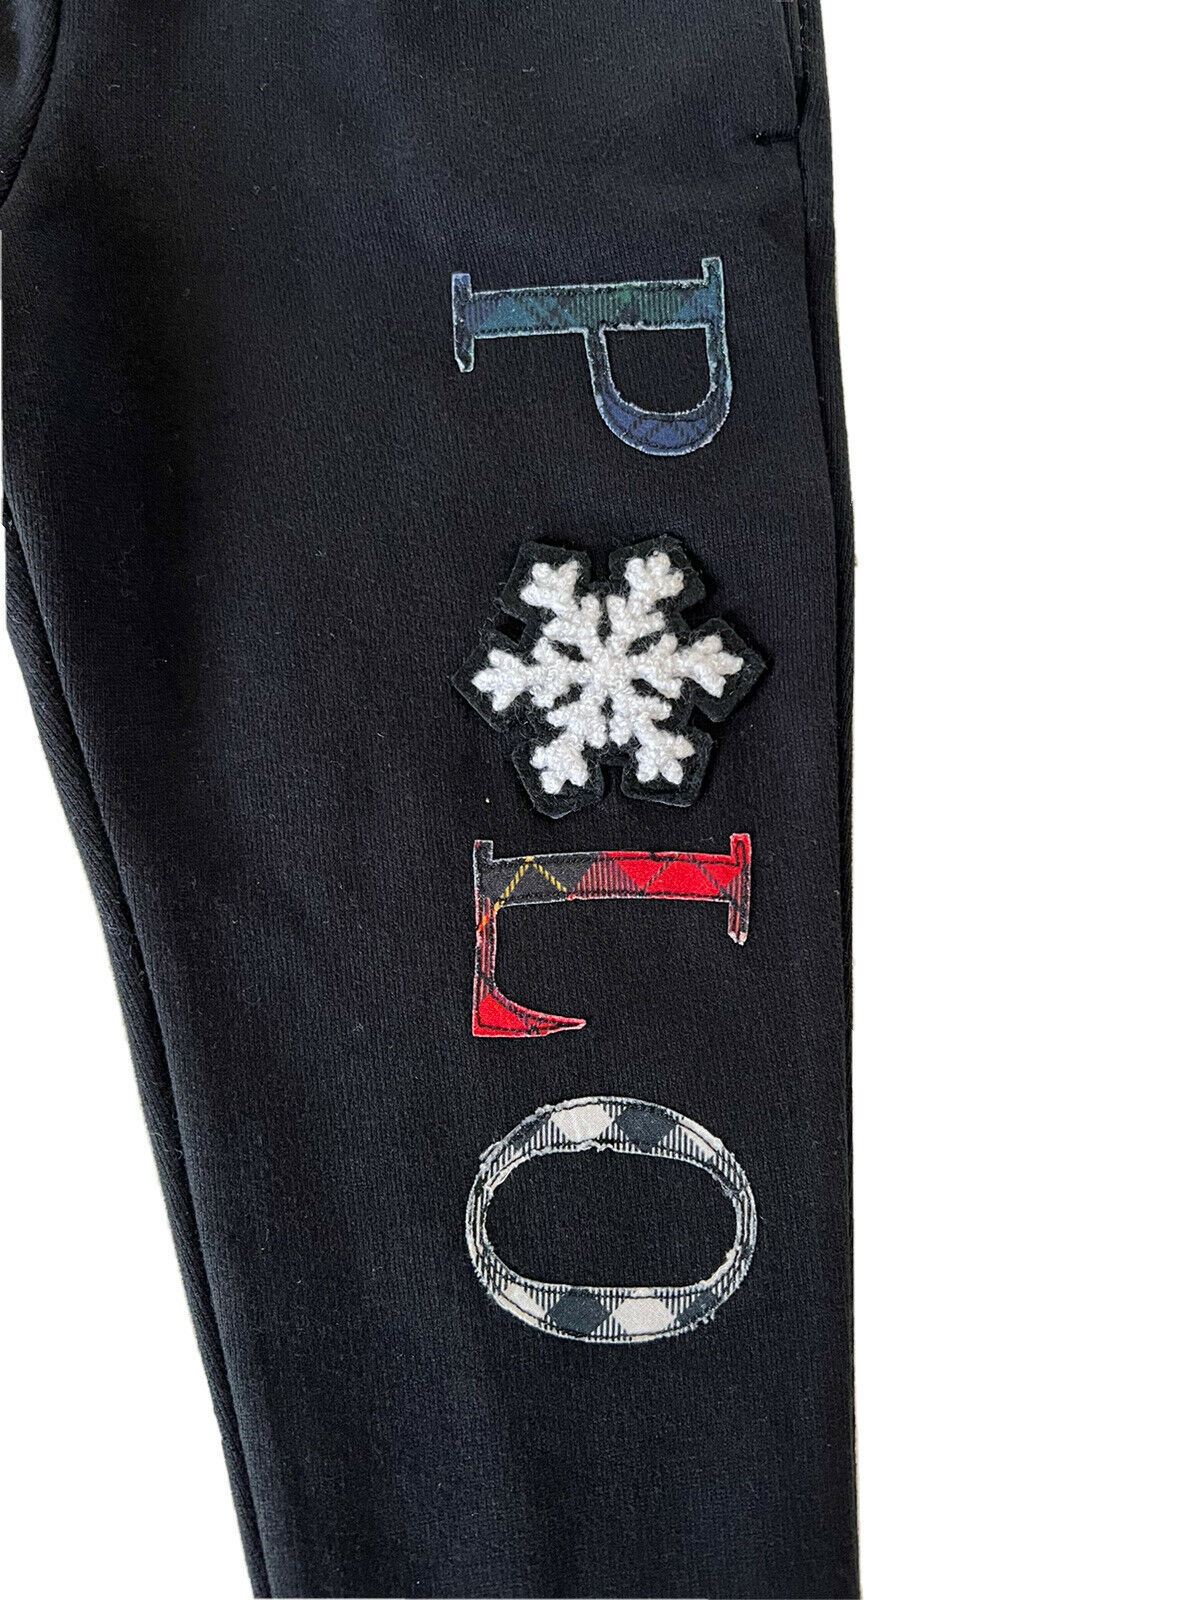 NWT Polo Ralph Lauren Boy's Black Snow Flake Casual Pant 6 Made in India